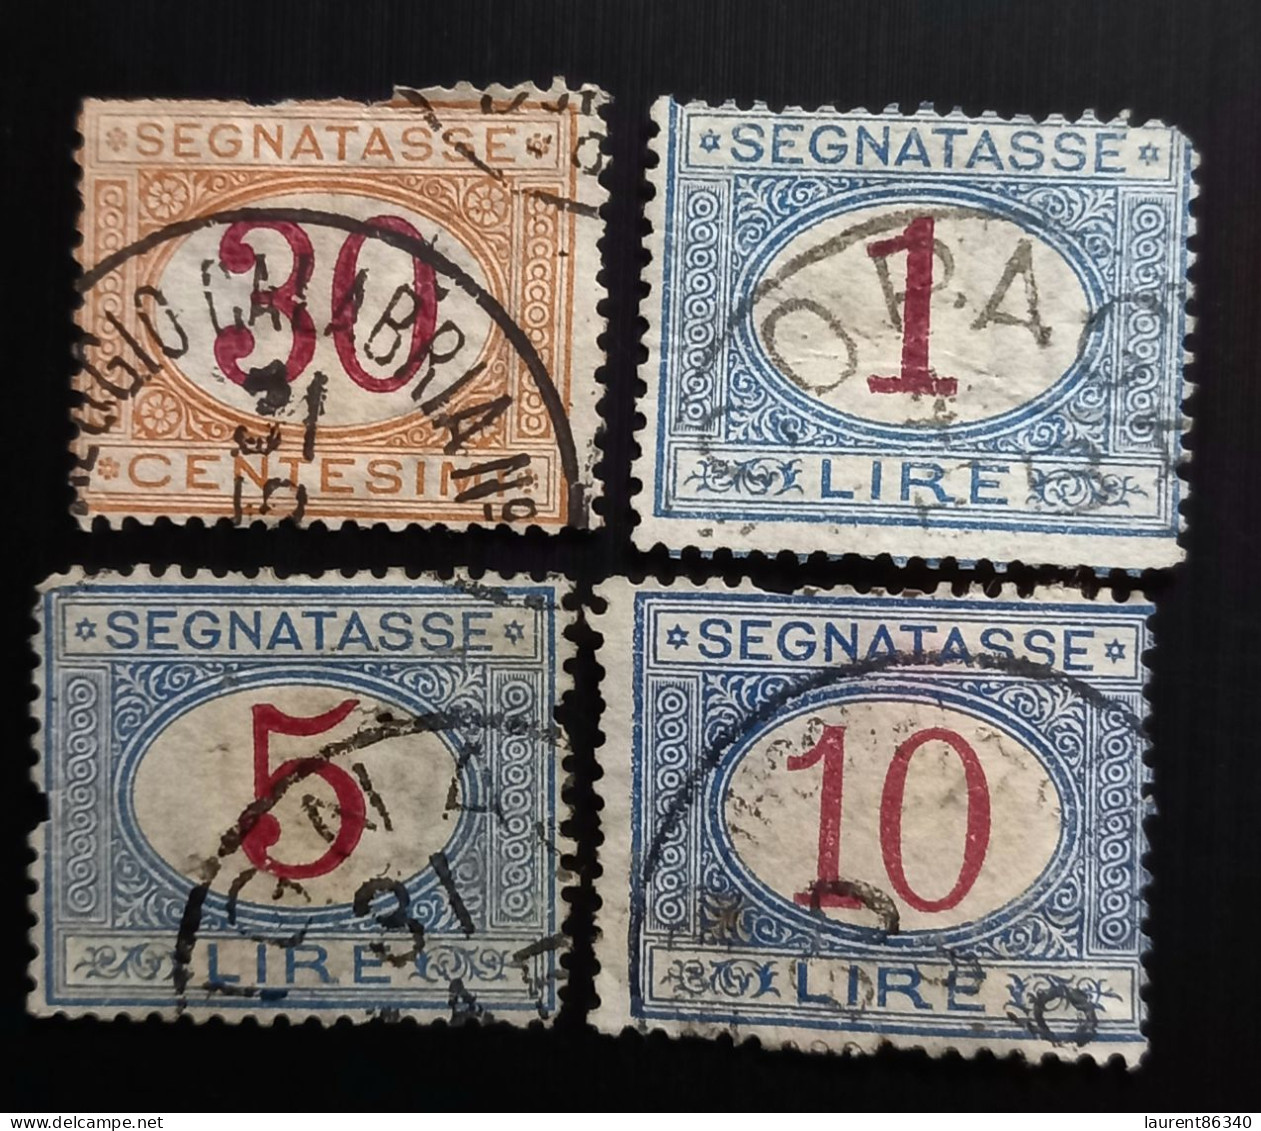 Italie 1870 -1894 Timbre D'affranchissement Numeral Stamps - New Design Used - Entero Postal